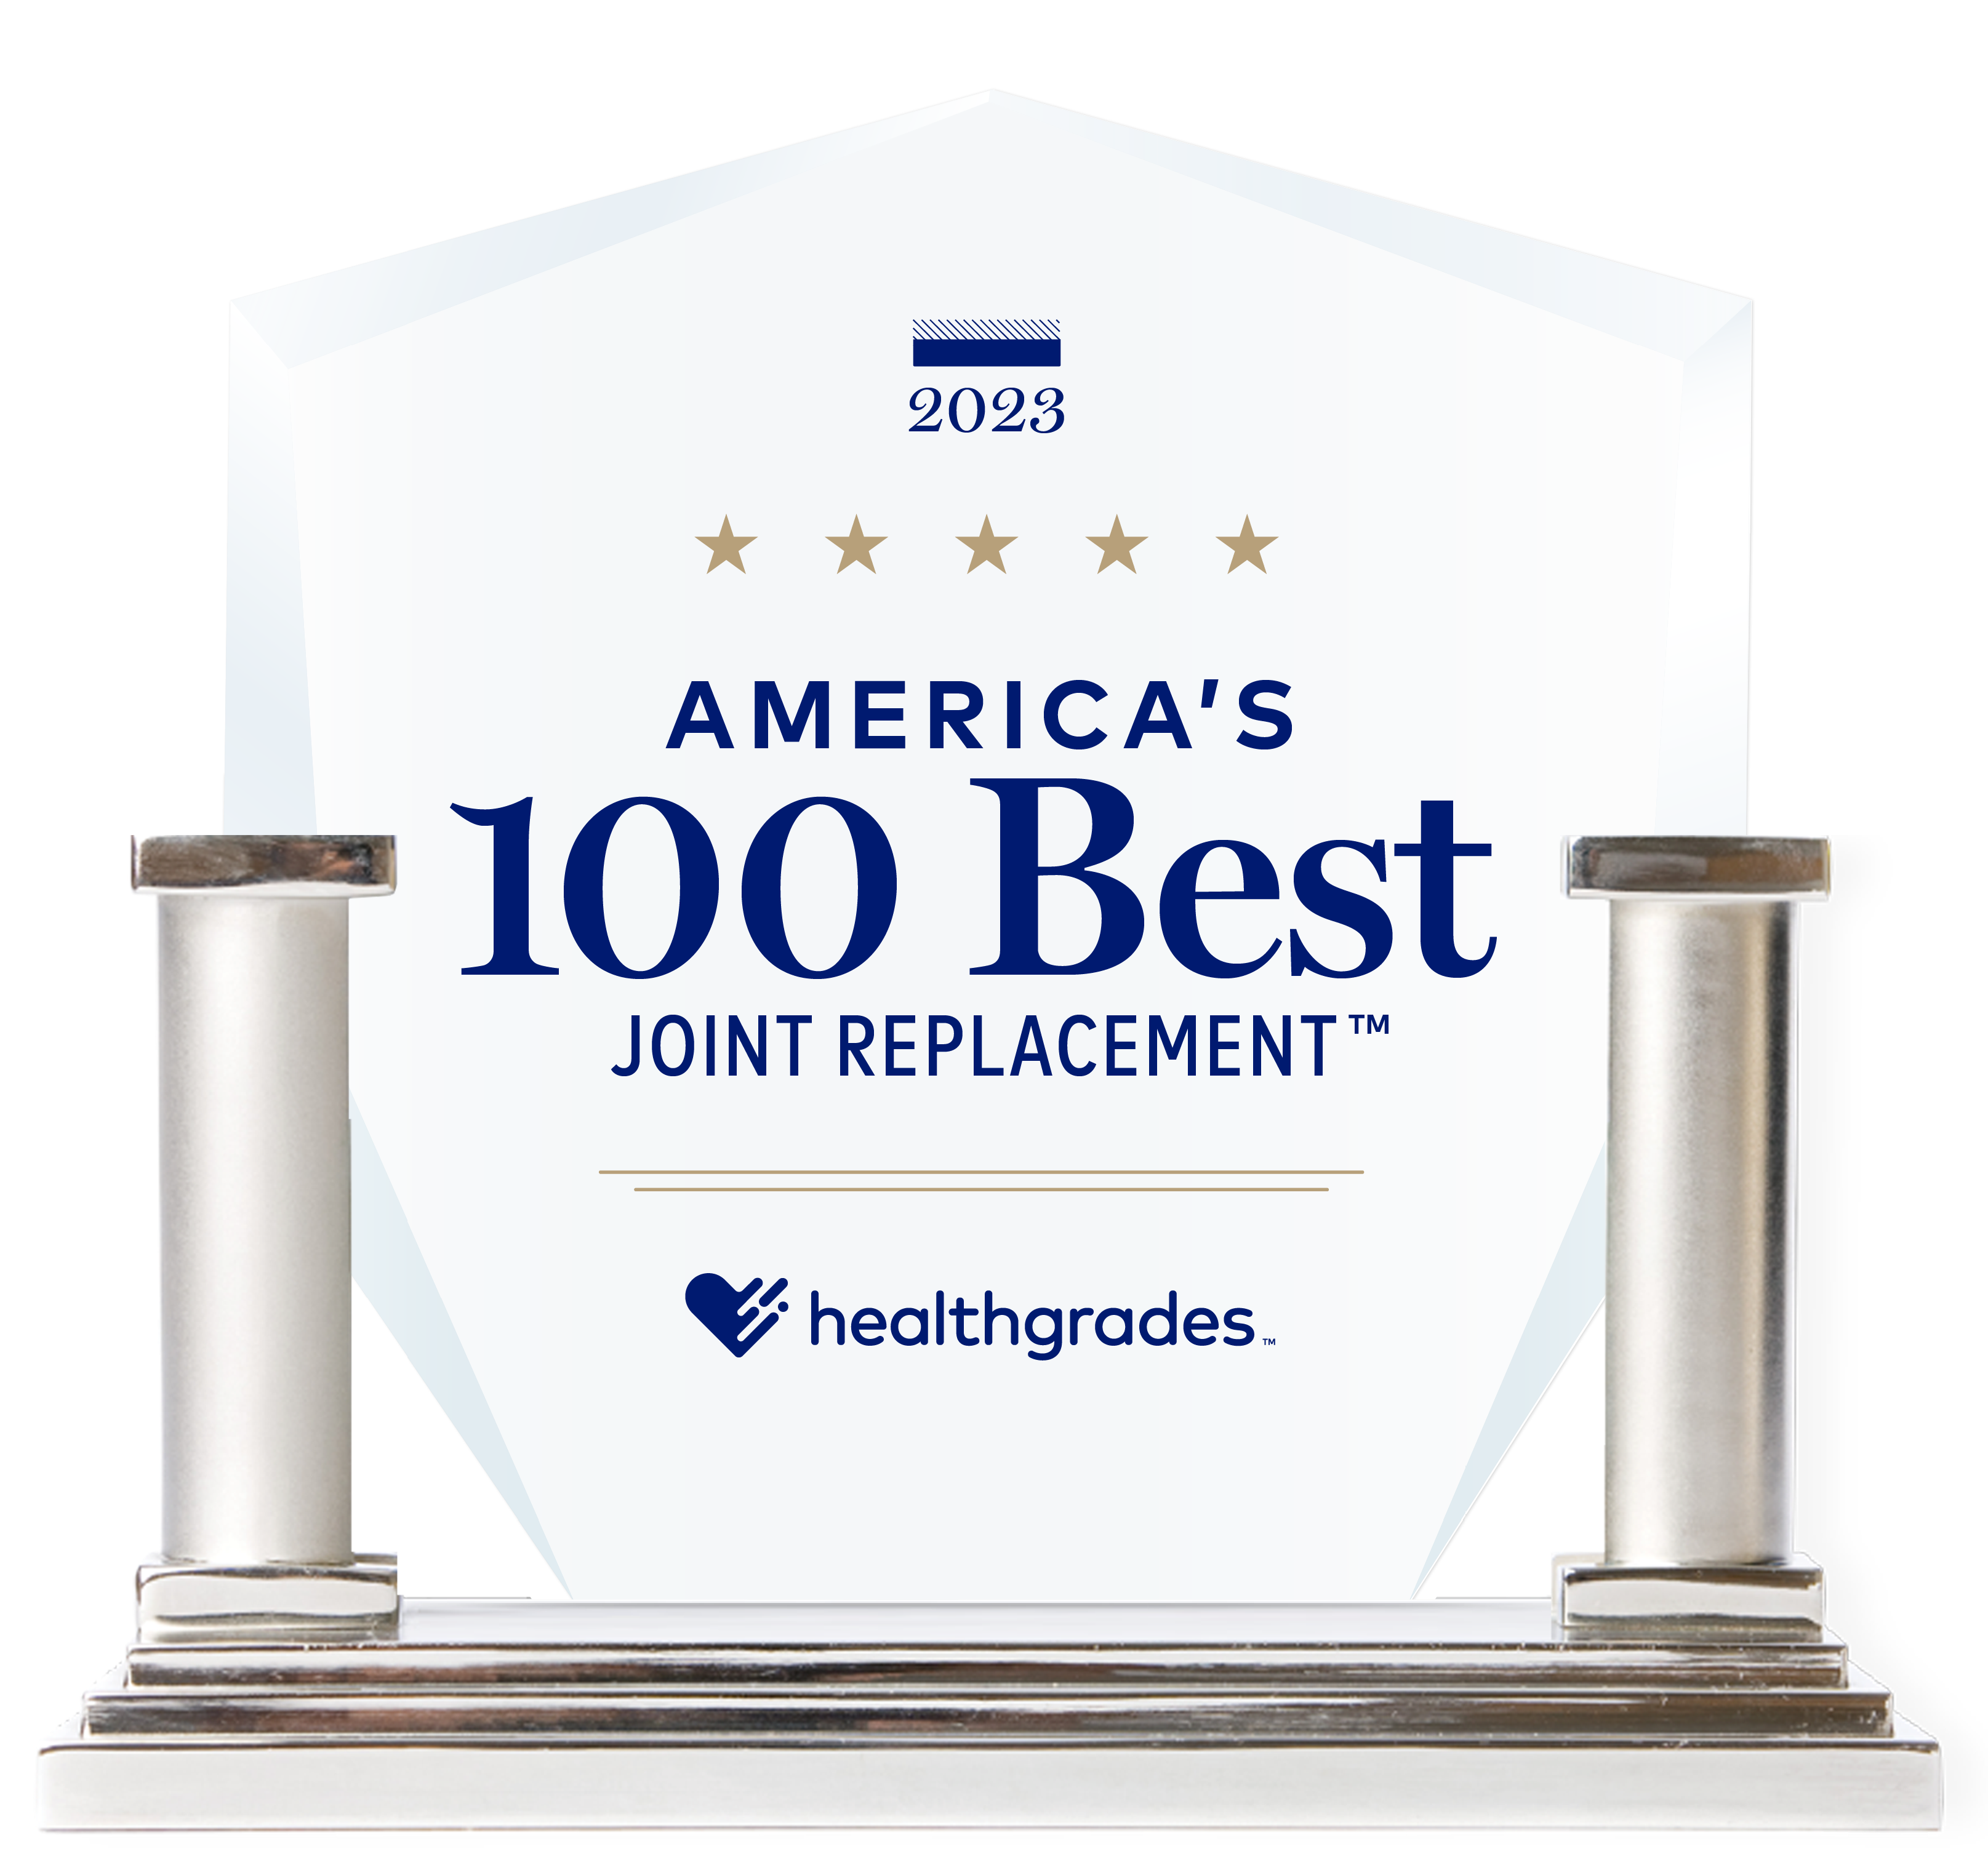 100 Best Joint Replacement Healthgrades